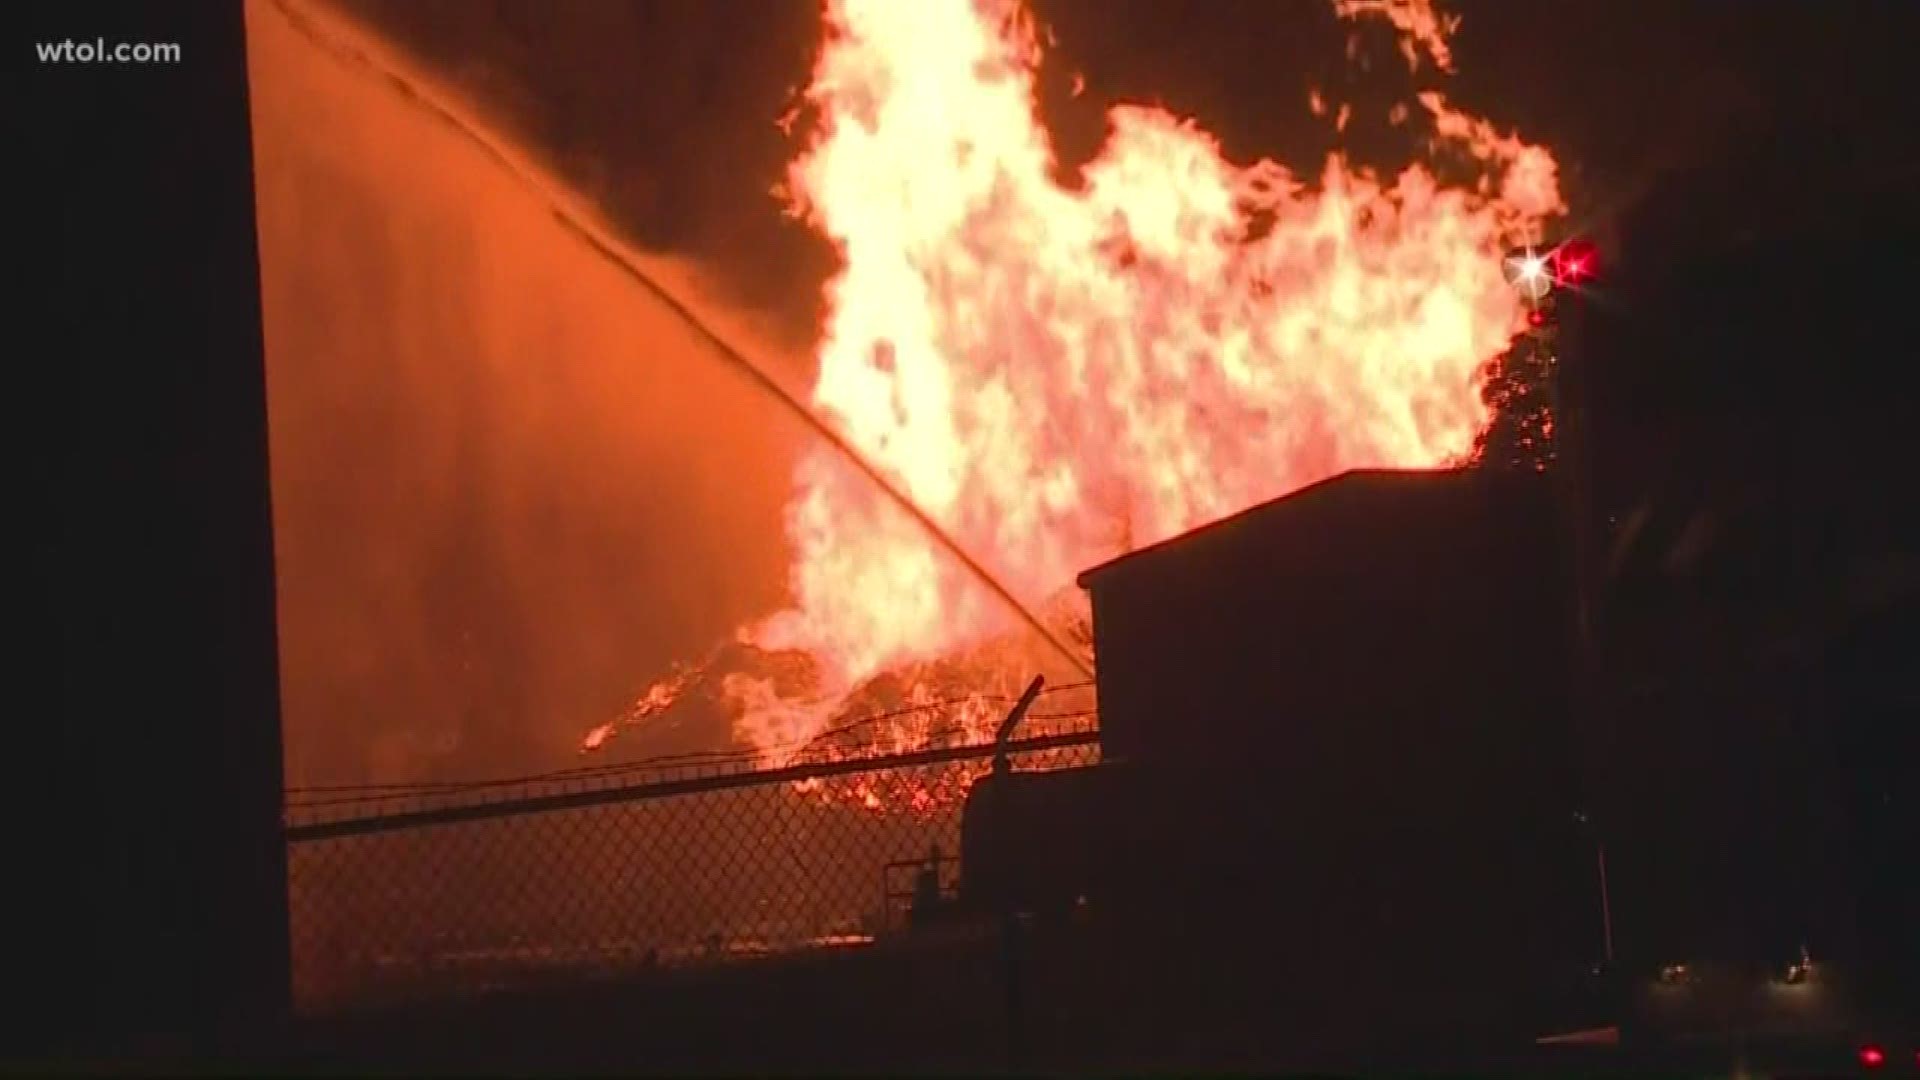 A 'major fire' broke out at a Jim Beam facility Tuesday night and crews are still working to put it out.